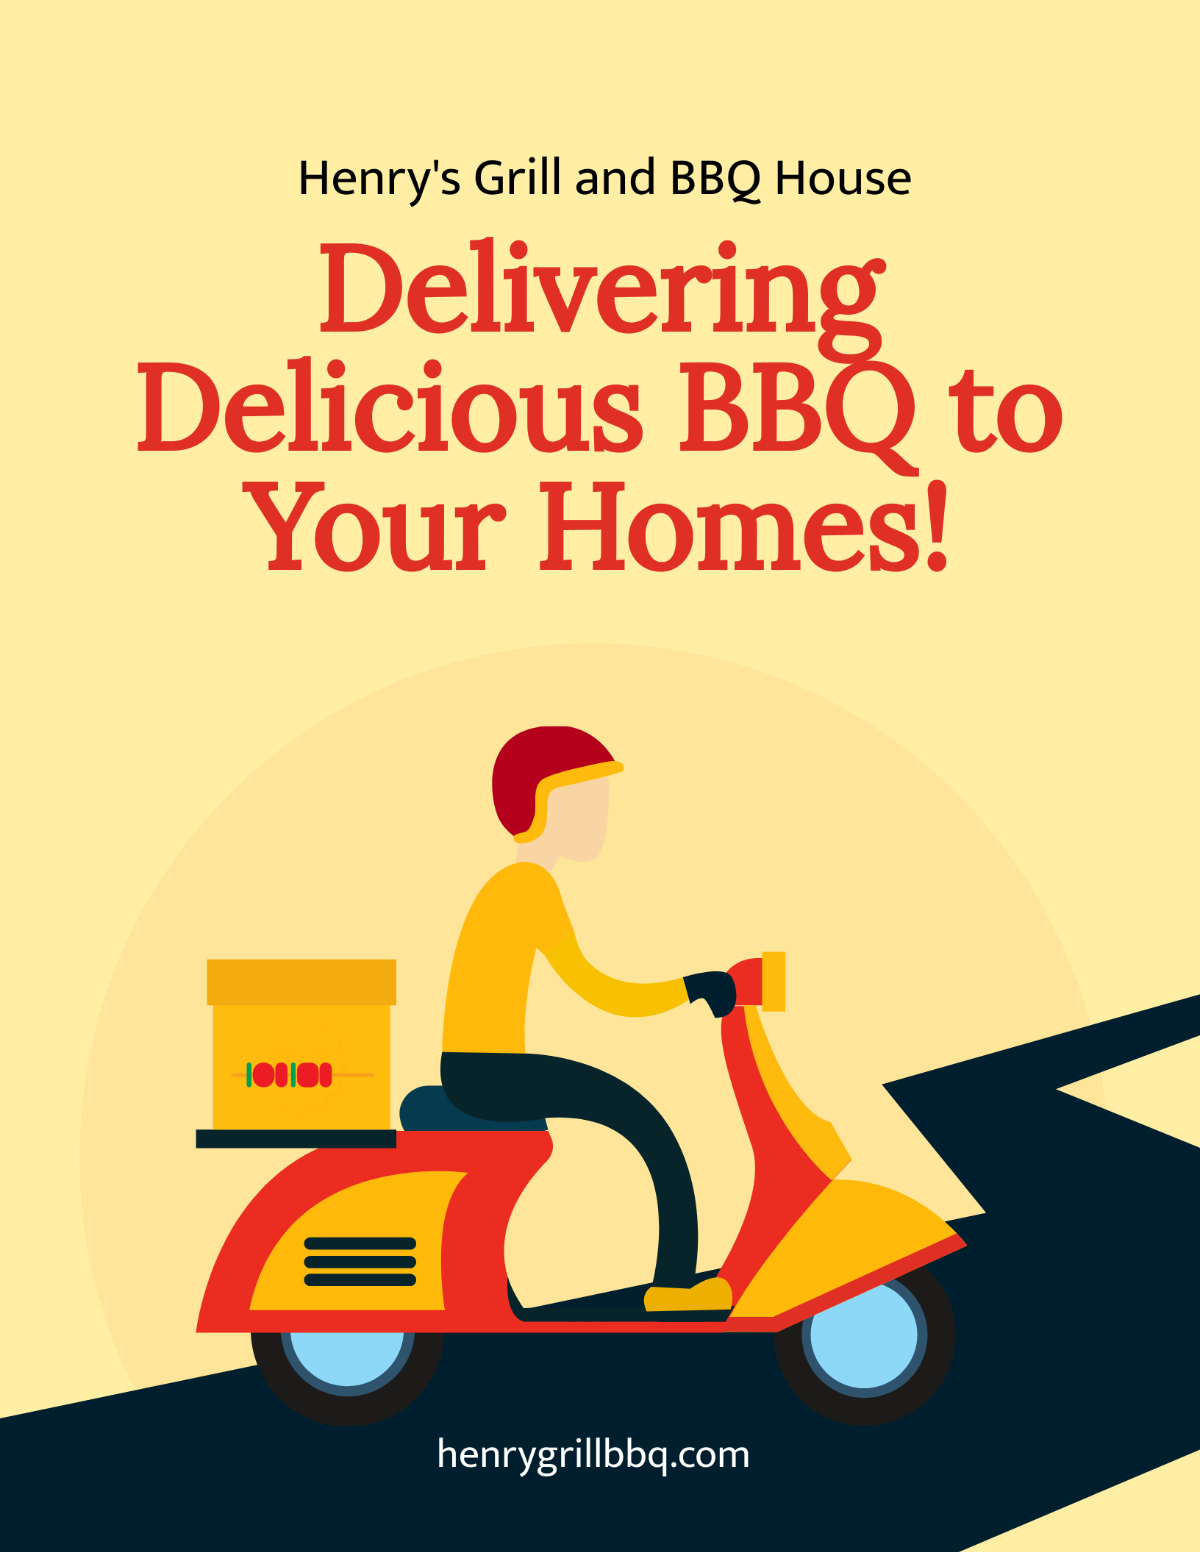 BBQ Delivery Offer Flyer Template